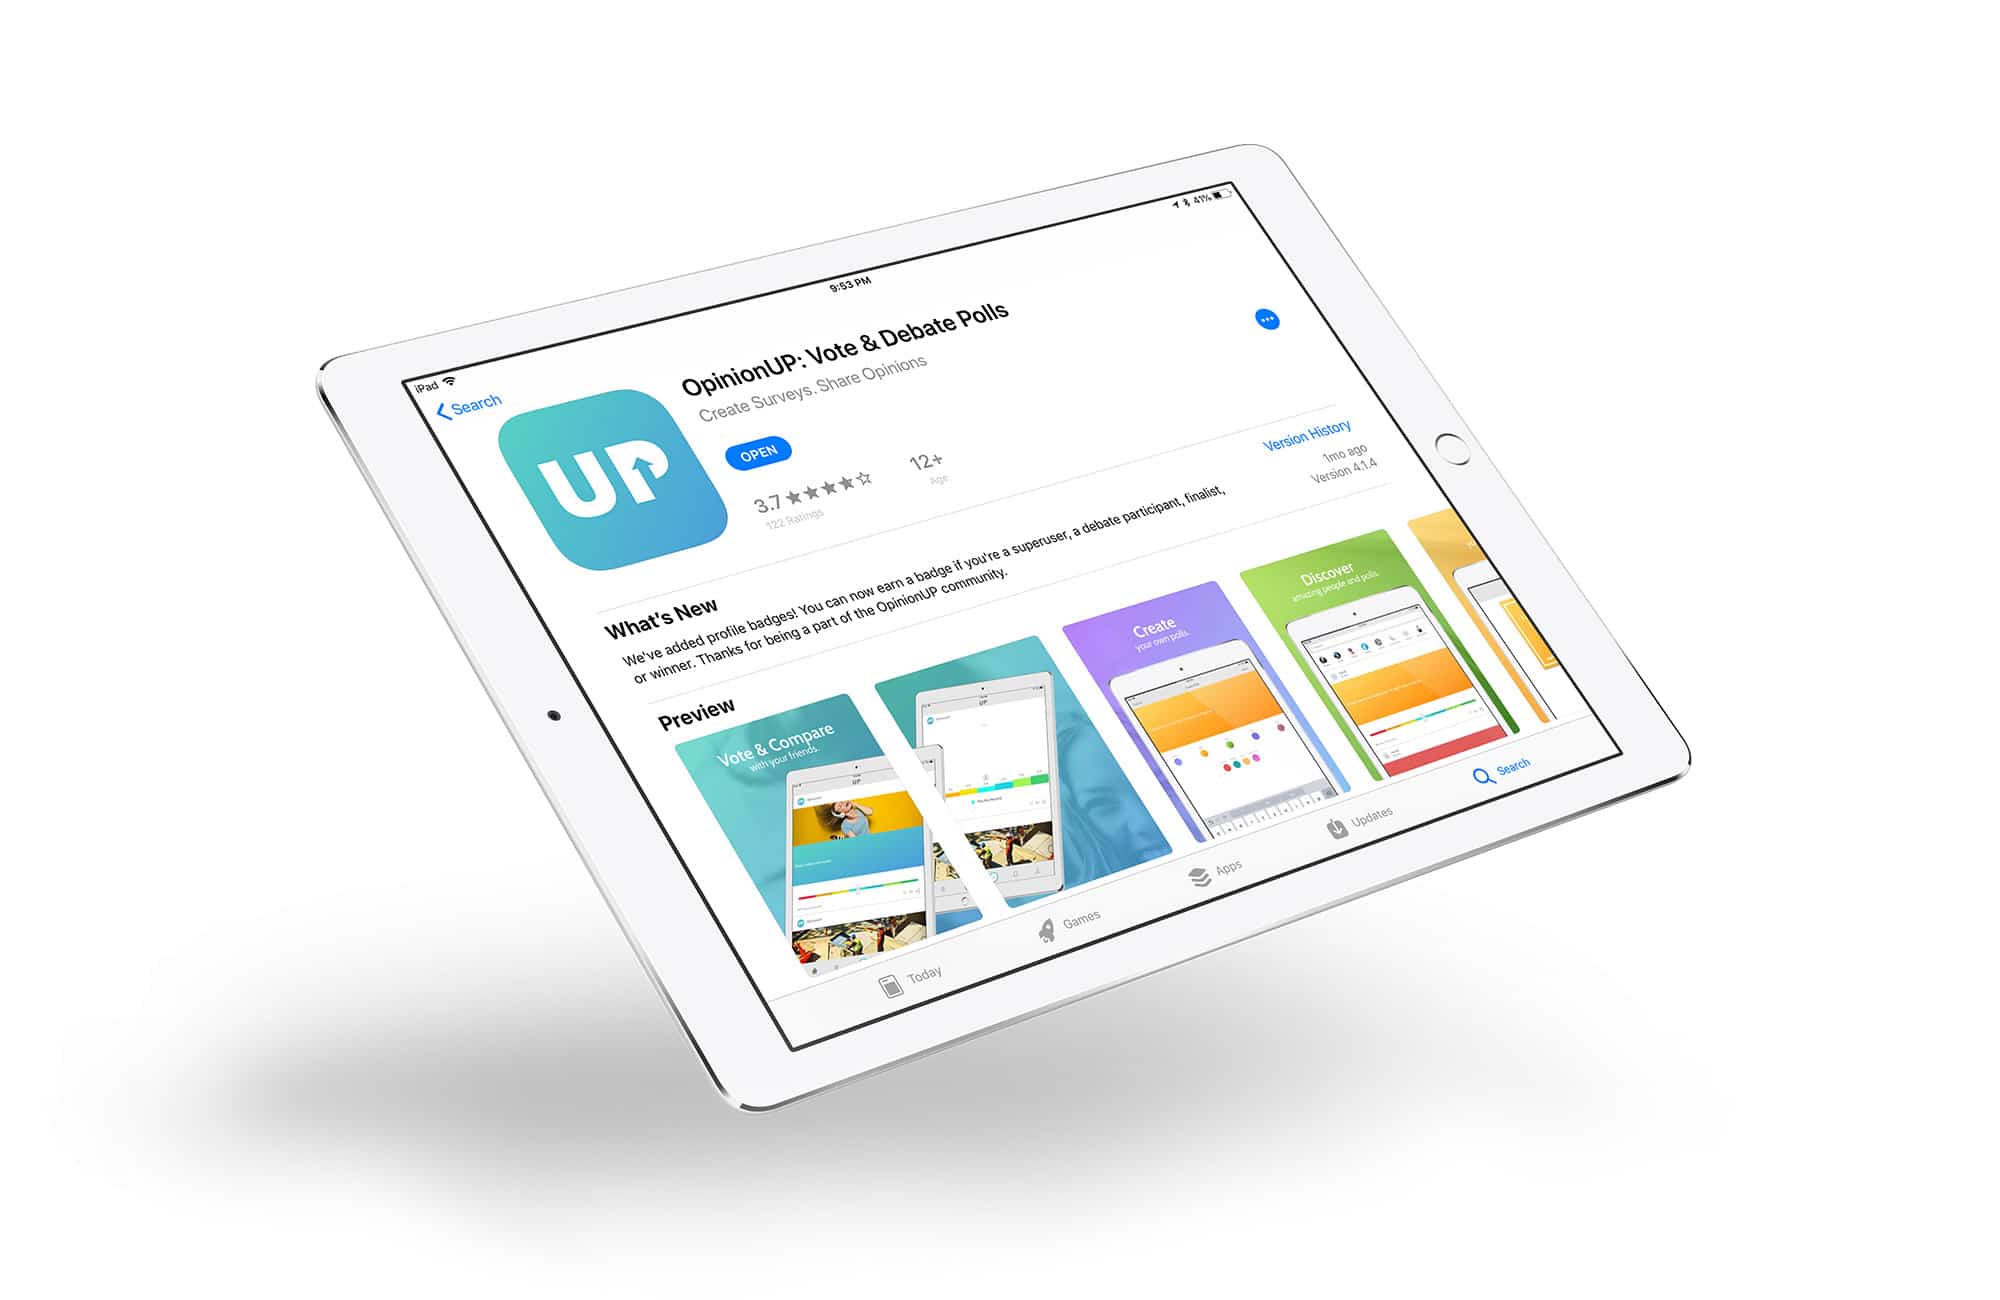 Punch- OpinionUP App Store with OpinionUP in iPad